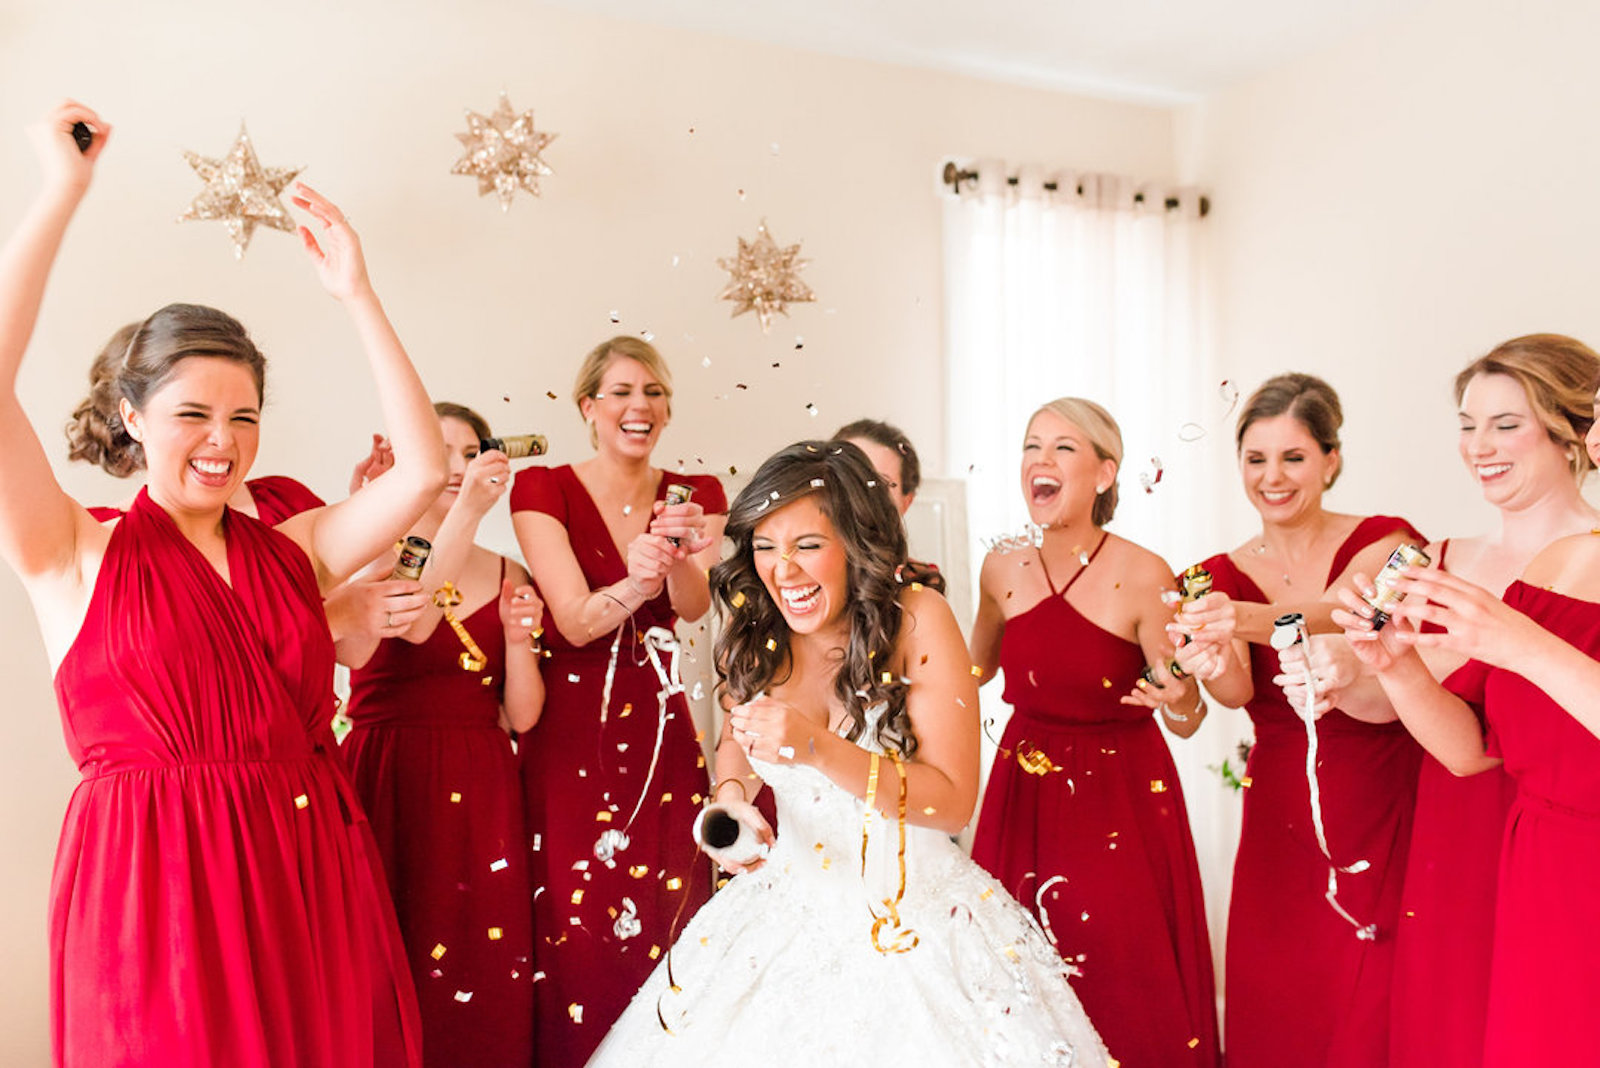 difference between maid of honor and chief bridesmaid